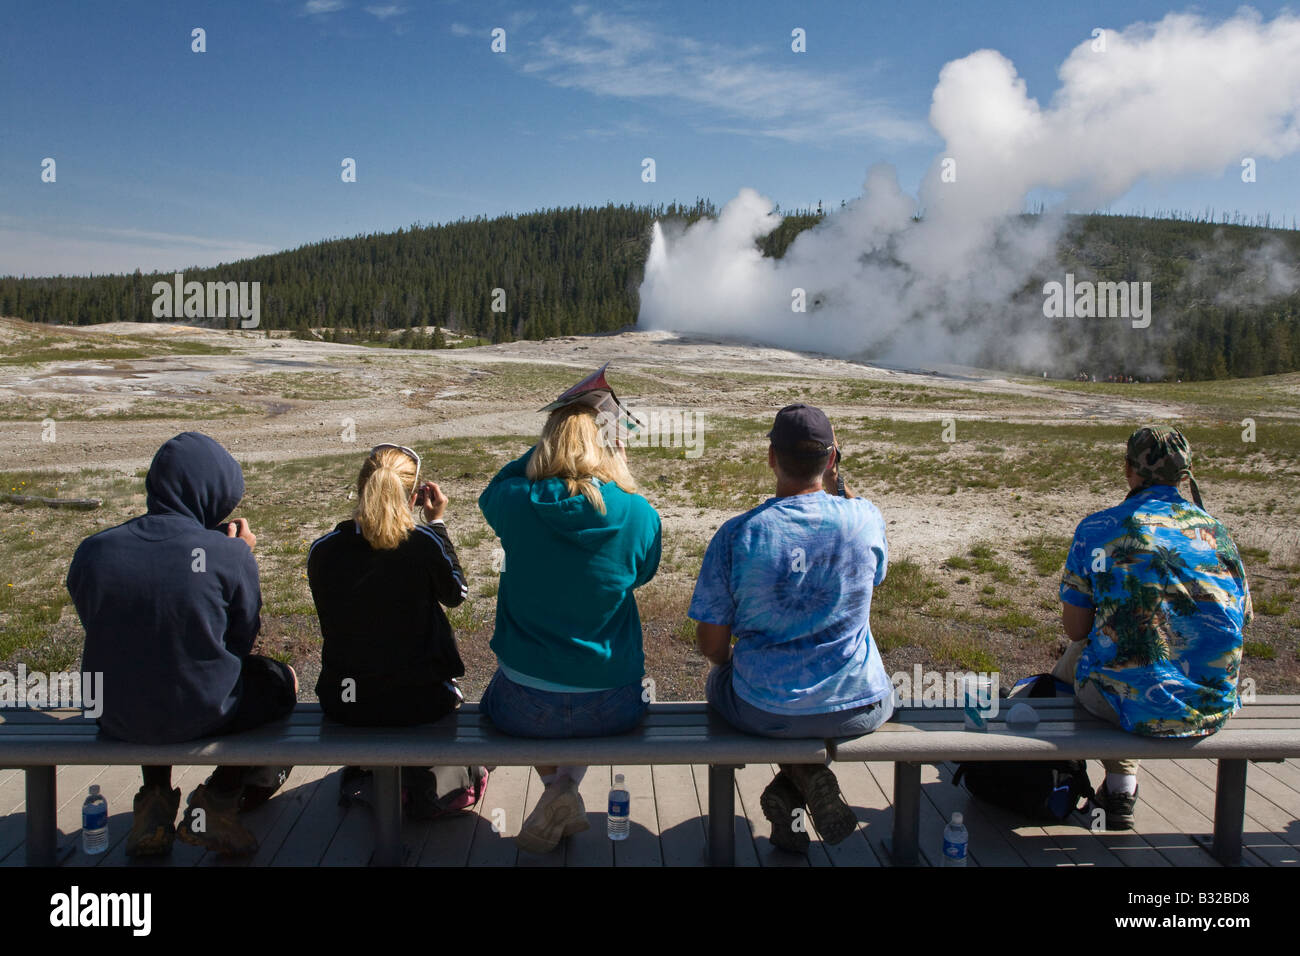 OLD FAITHFUL GEYSER erupts hourly sending 8 400 gallons of boiling water 184 feet into the air YELLOWSTONE NATIONAL PARK WYOMING Stock Photo